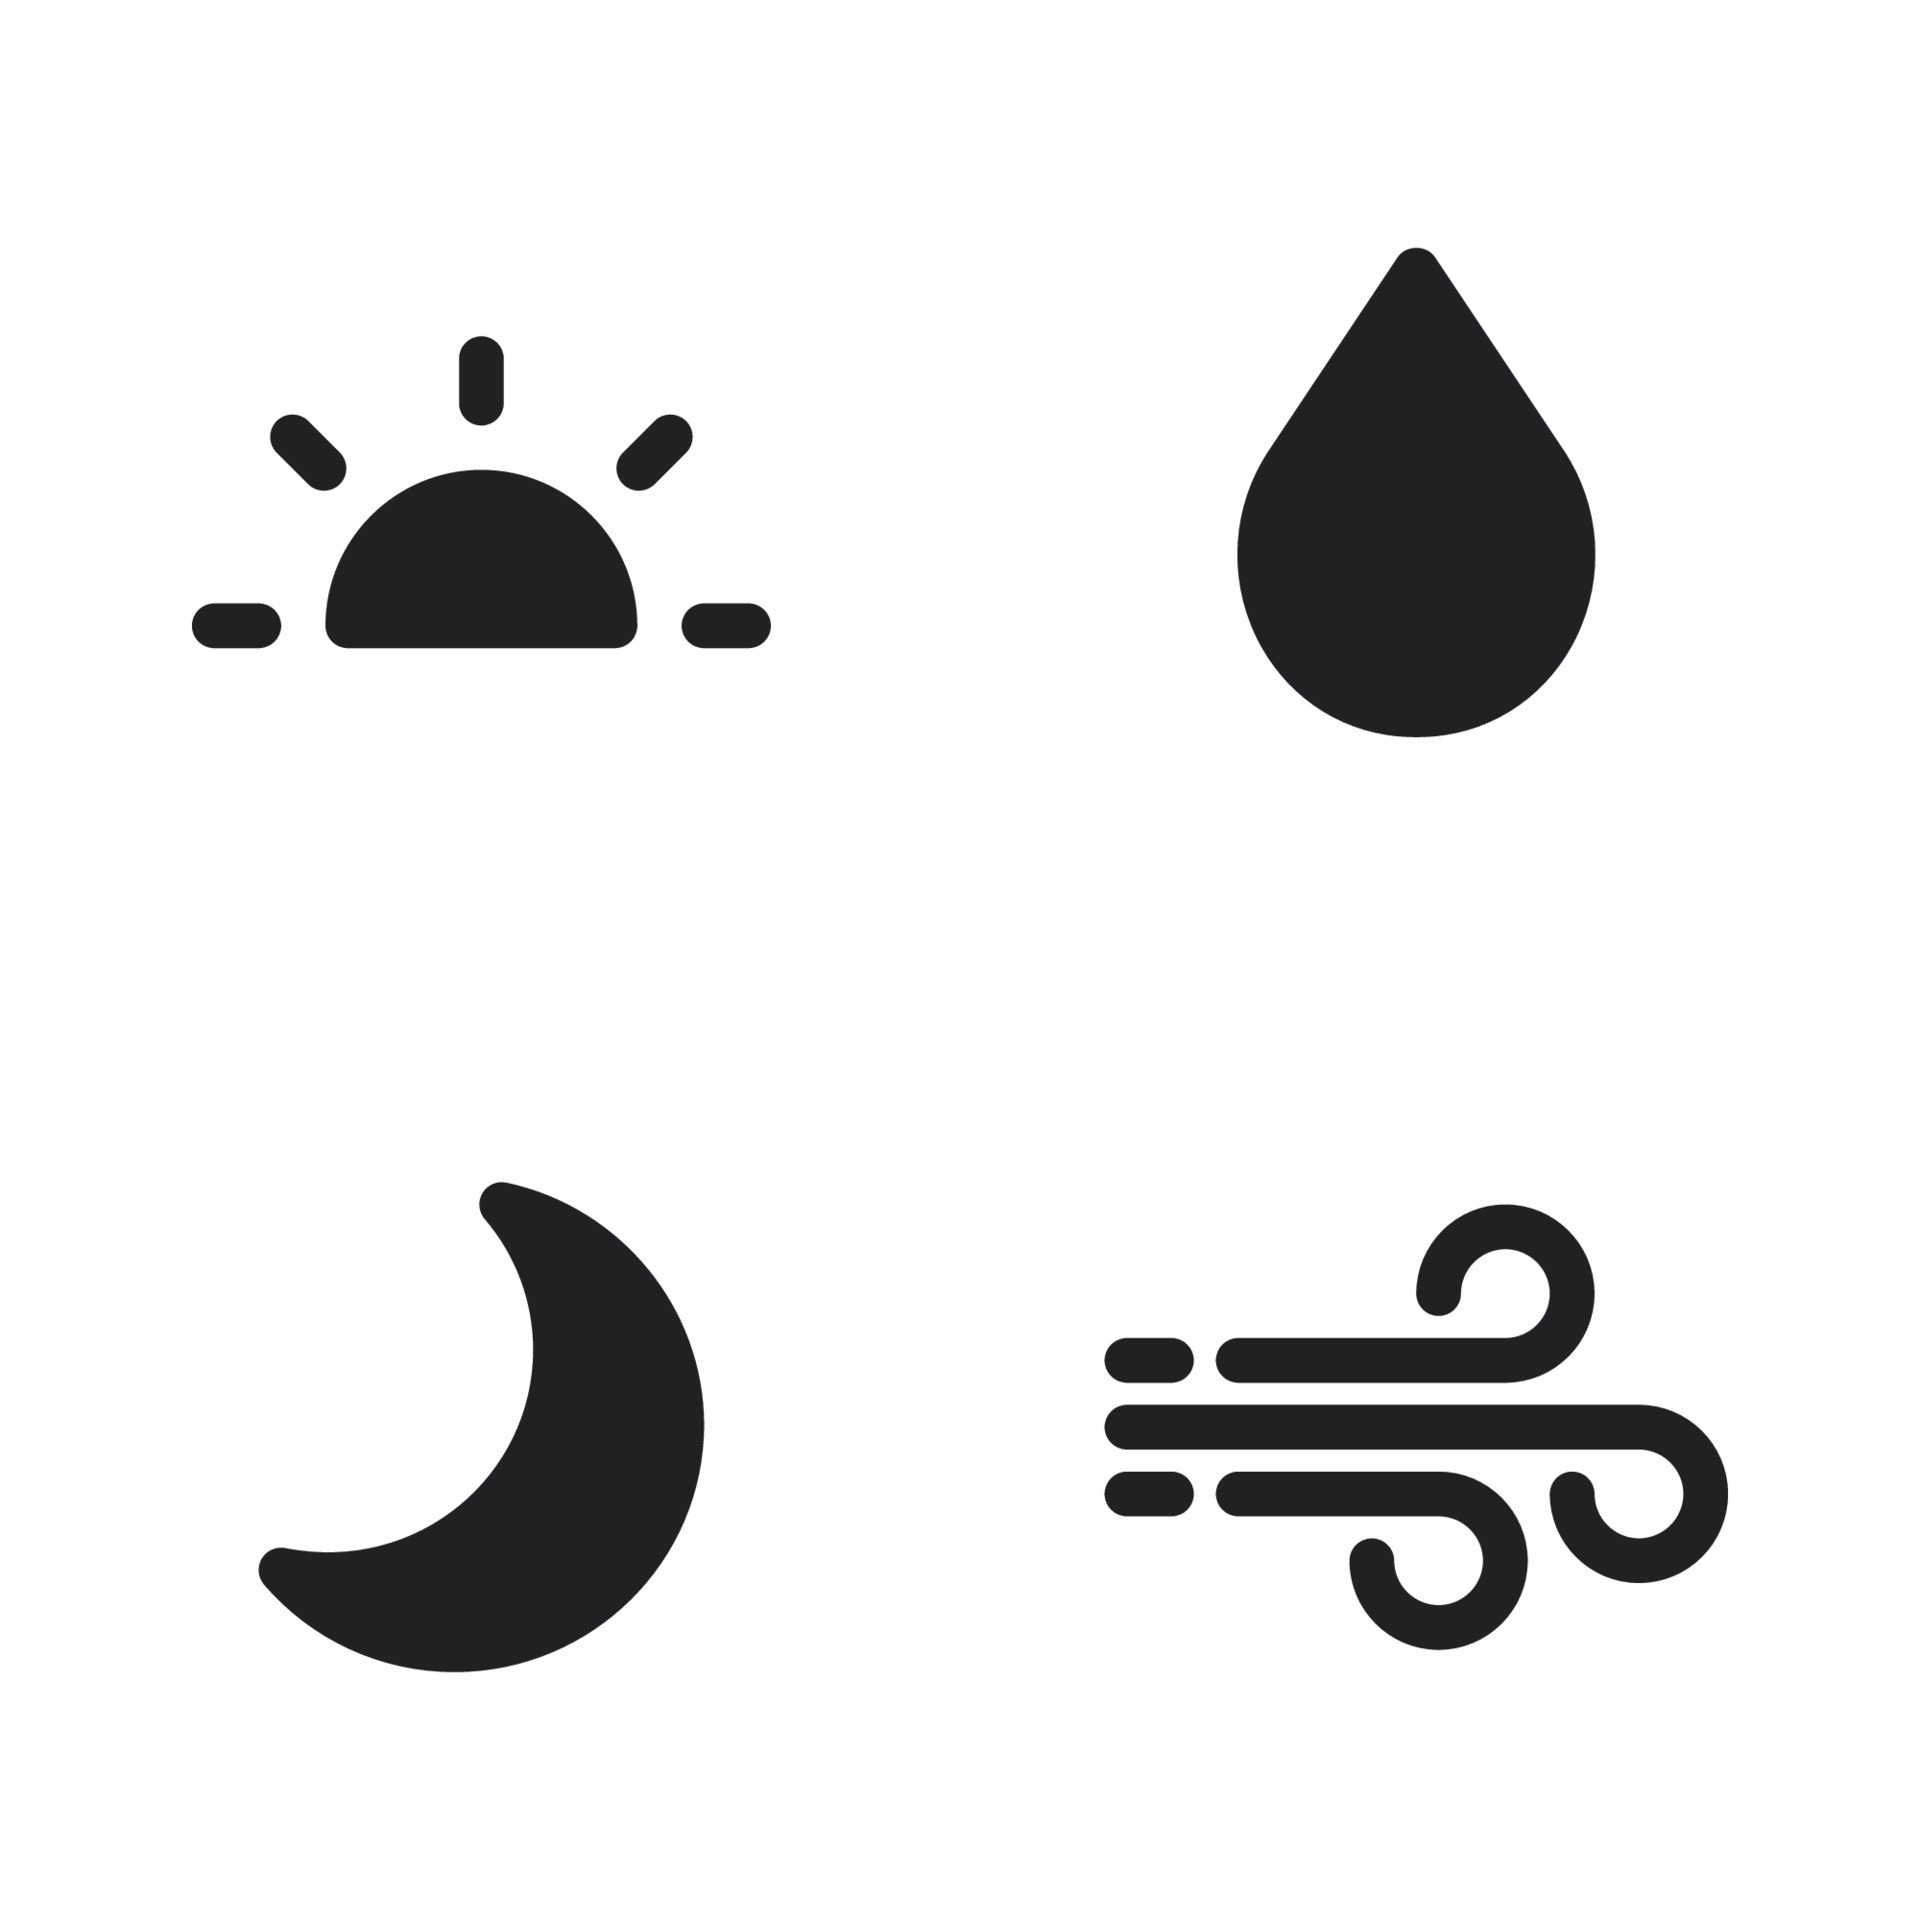 Moon - Free weather icons